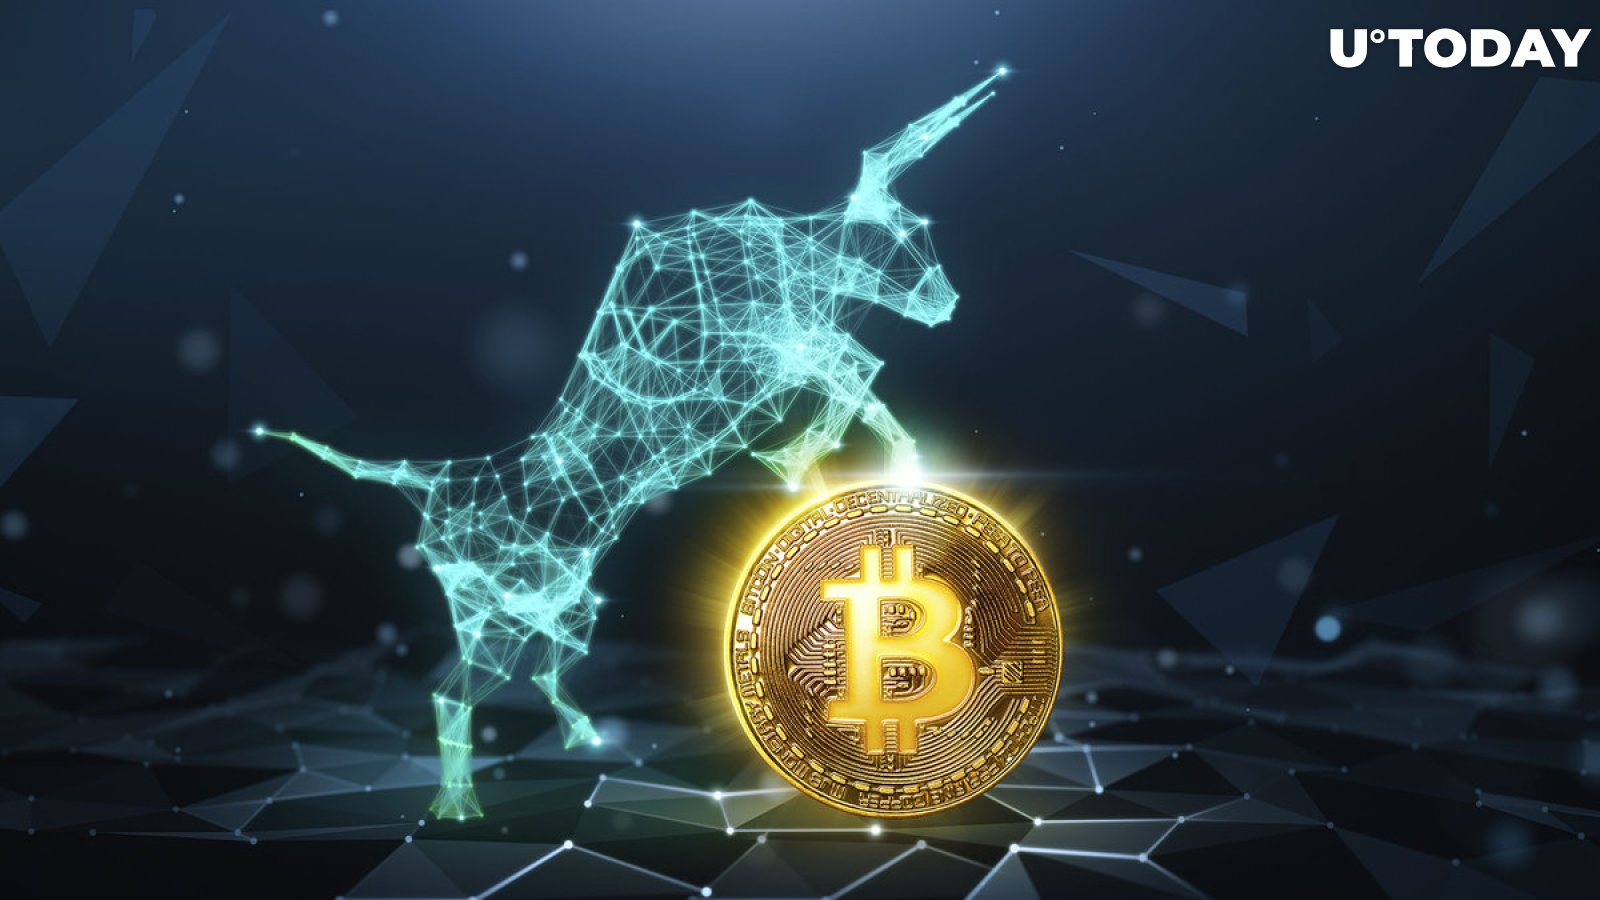 Bitcoin (BTC) Headed for Another Bullish Weekend, According to This Rare Pattern: Analyst